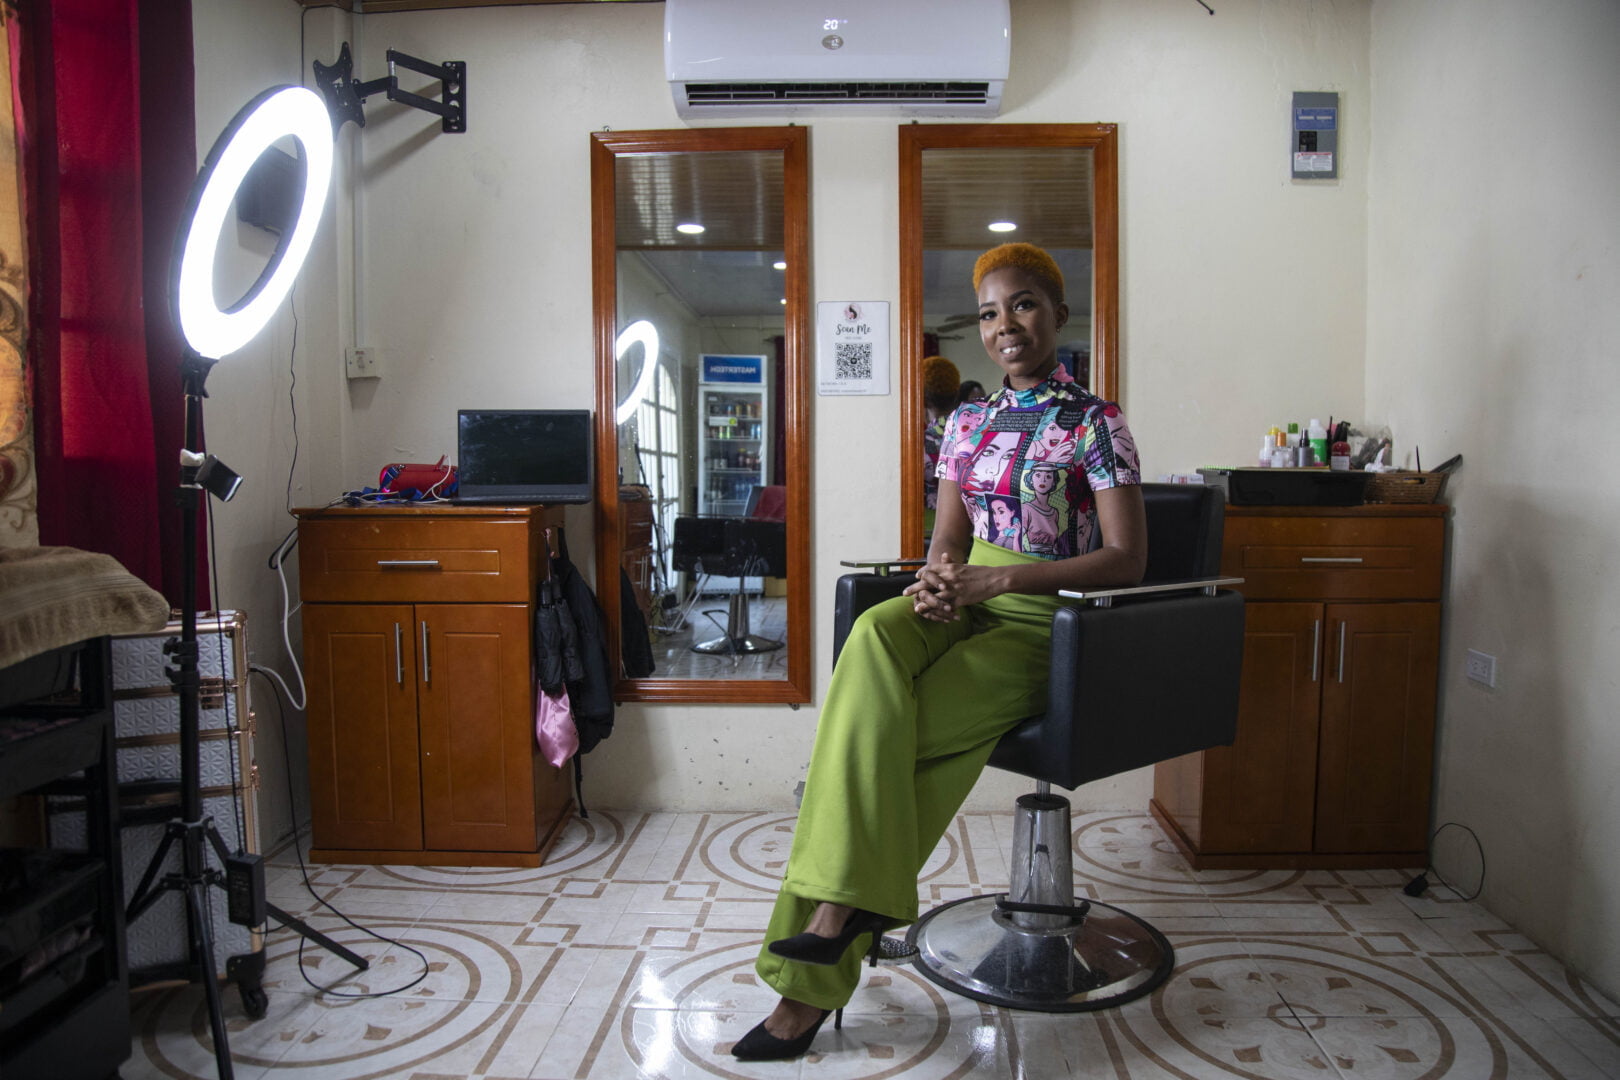 Latoya Rigby, a Black woman with very short, organe hair, poses in a brightly coloured patterned top and bright green trousers. She is sitting in her hair salon, in a hair cutting chair, with a bright ring light illuminating her, and is smiling at the camera.